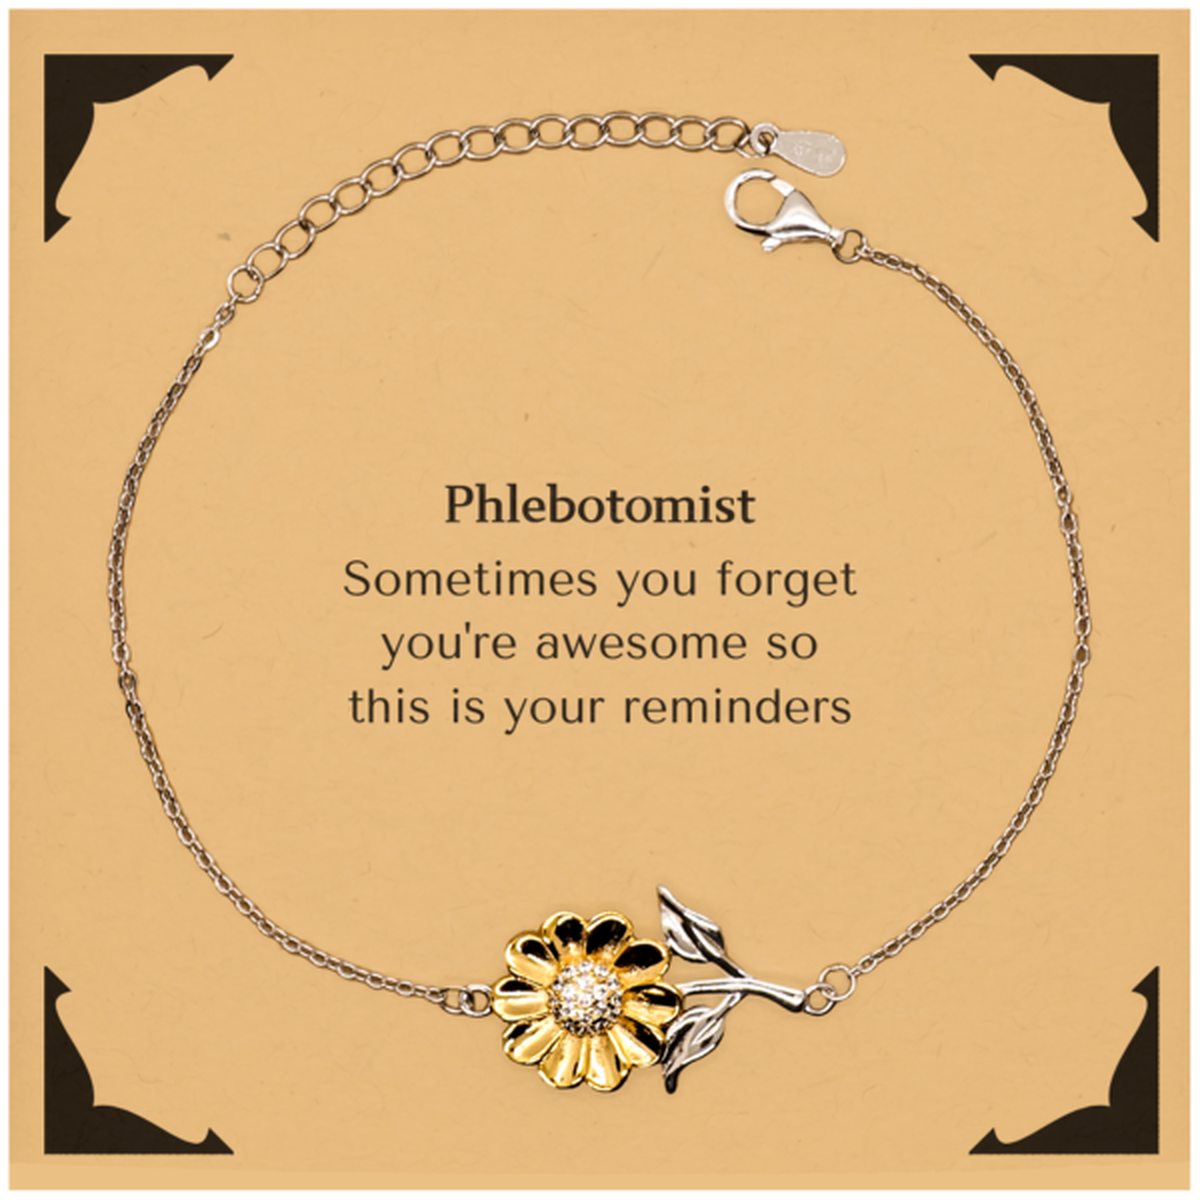 Sentimental Phlebotomist Sunflower Bracelet, Phlebotomist Sometimes you forget you're awesome so this is your reminders, Graduation Christmas Birthday Gifts for Phlebotomist, Men, Women, Coworkers